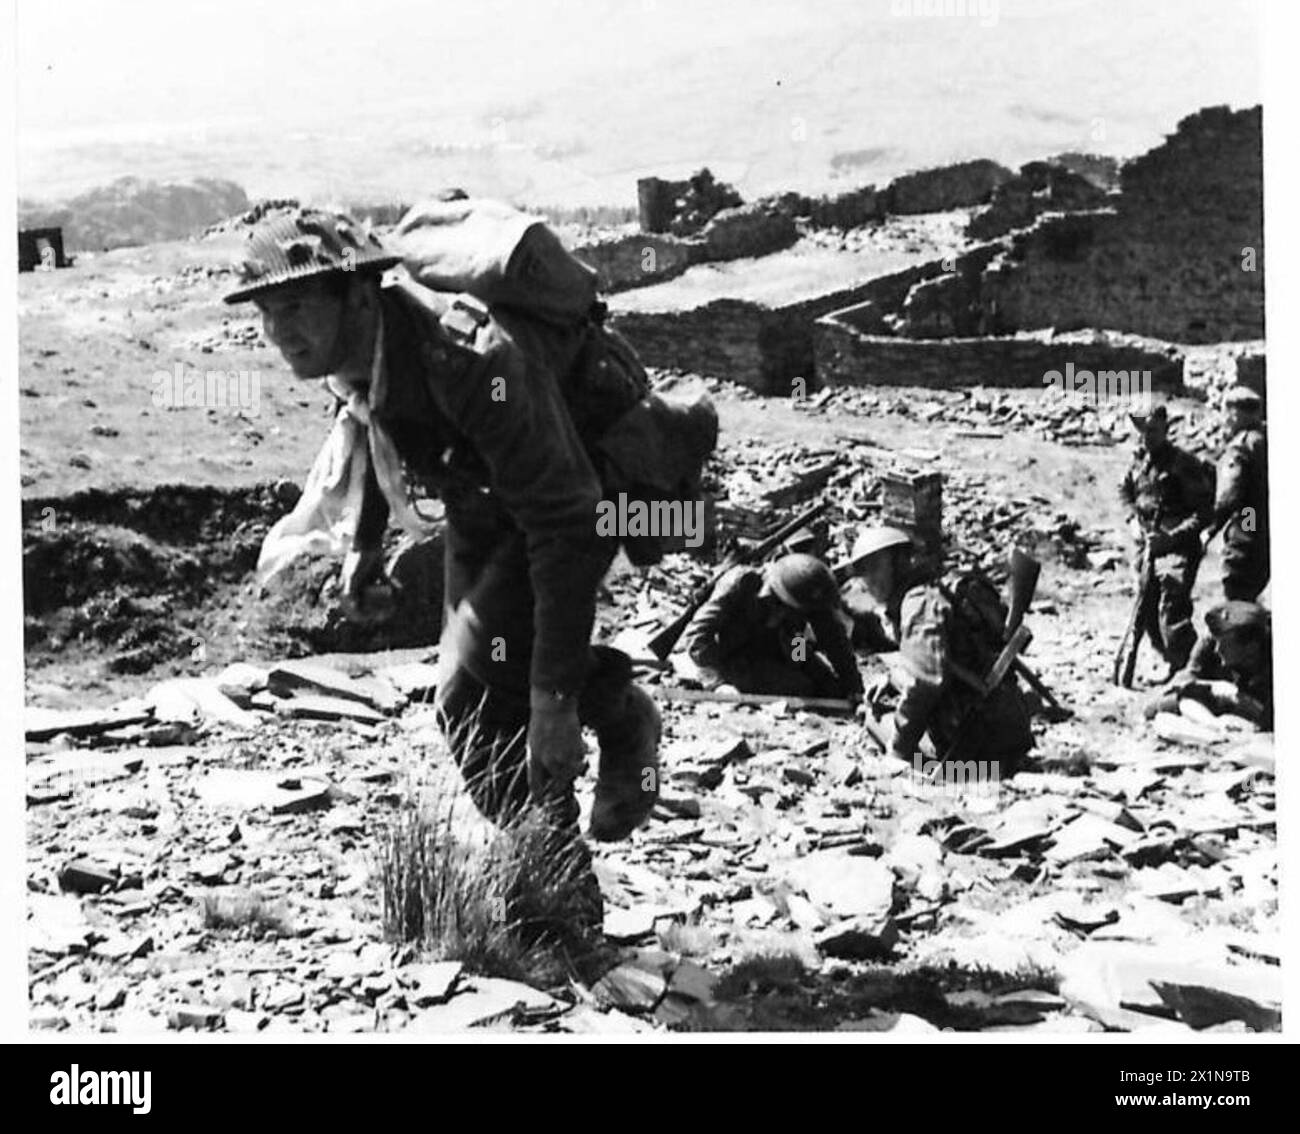 TOUGHENING-UP AT A BATTLE SCHOOL - A captain leads his men through the quarry to make the final attack, British Army Stock Photo